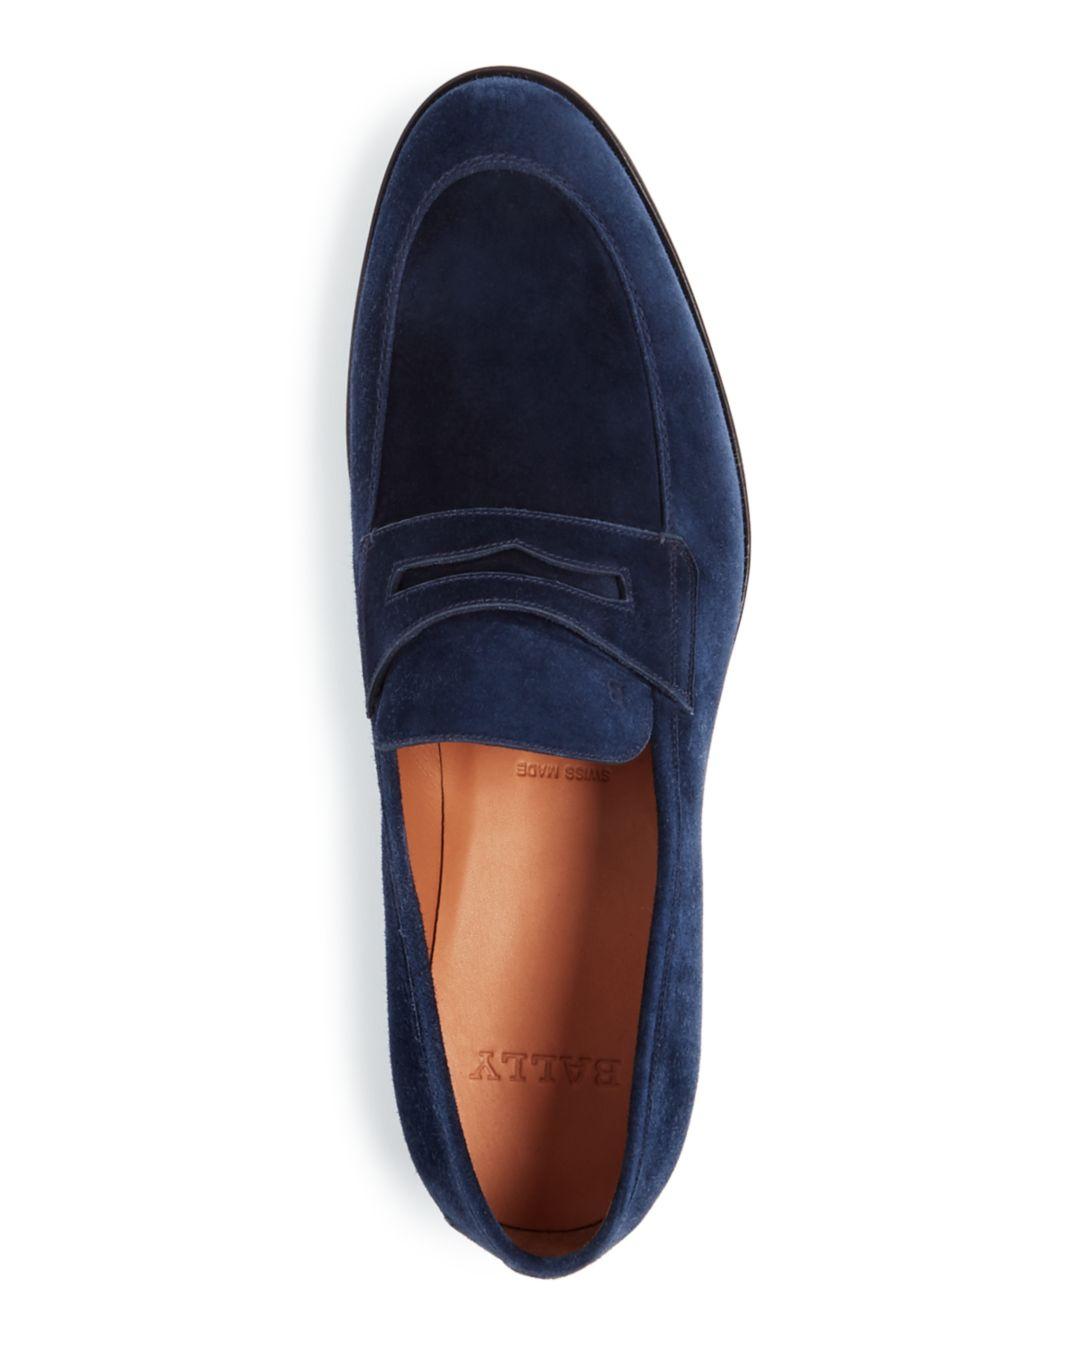 Bally Suede Webb Apron Toe Penny Loafers in Blue Suede (Blue) for Men | Lyst